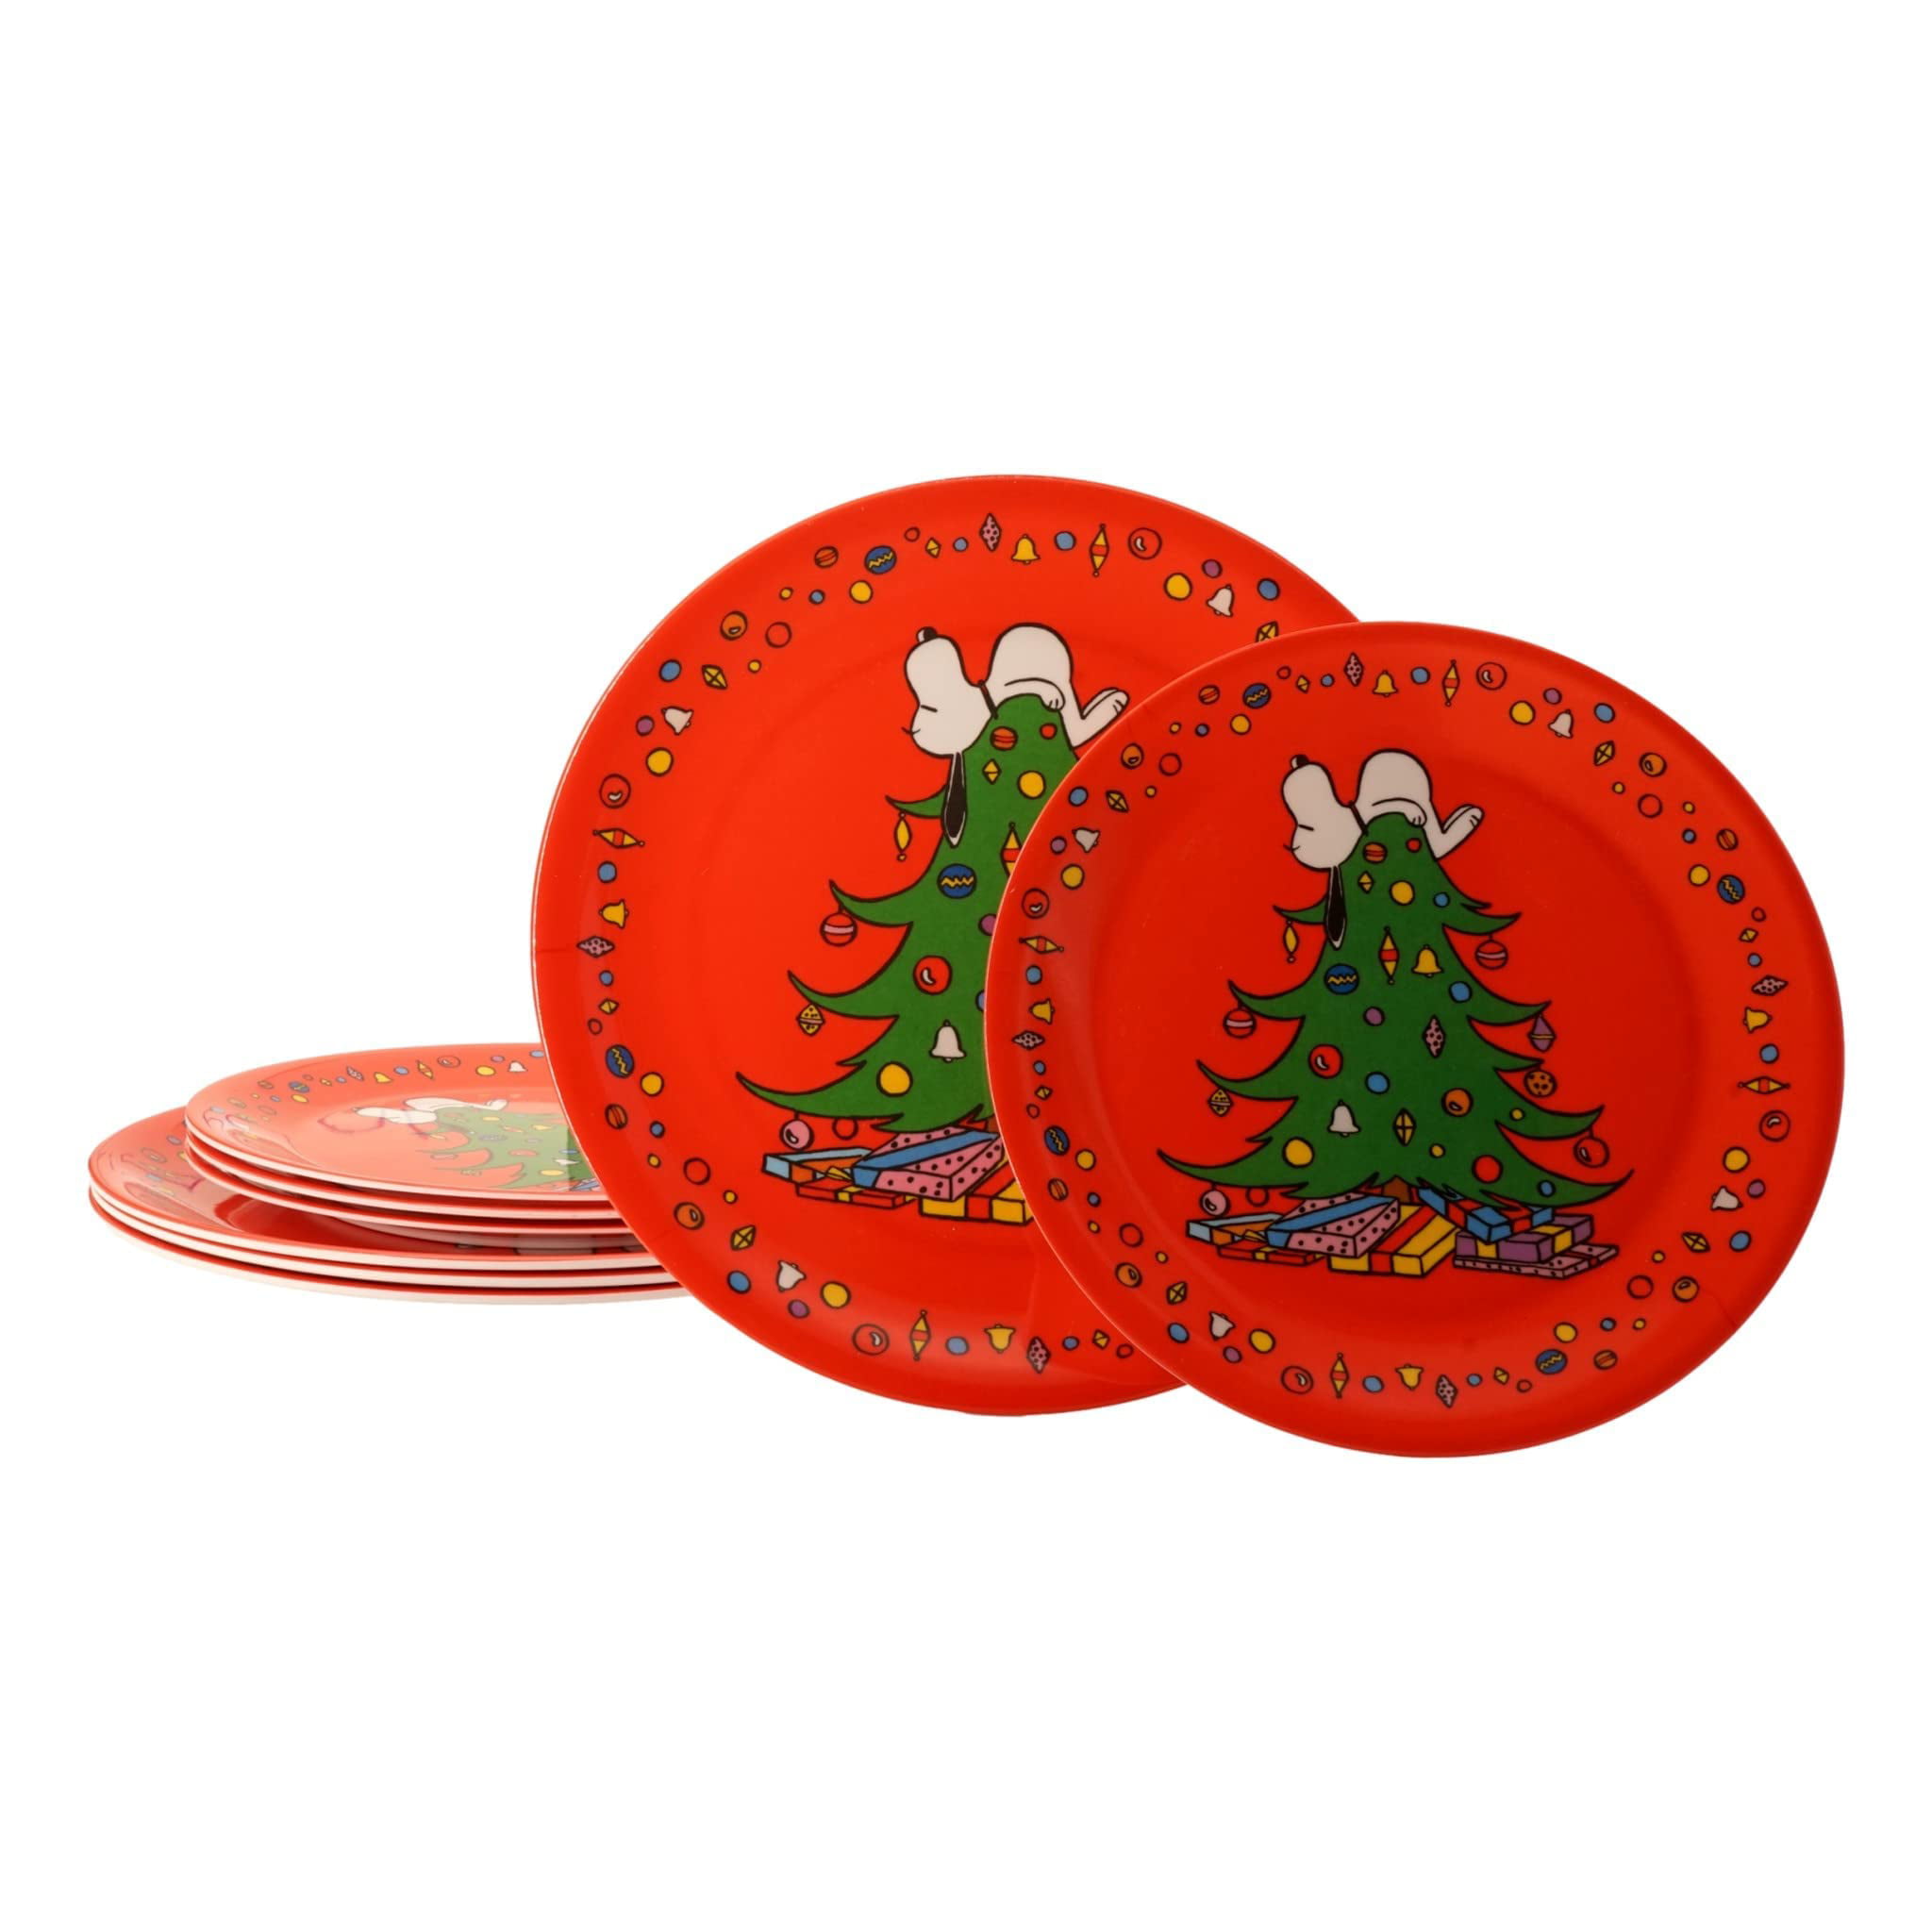 Details about   Peanuts Characters Serving Dish Divided Melamine Tray Charlie Brown Christmas 